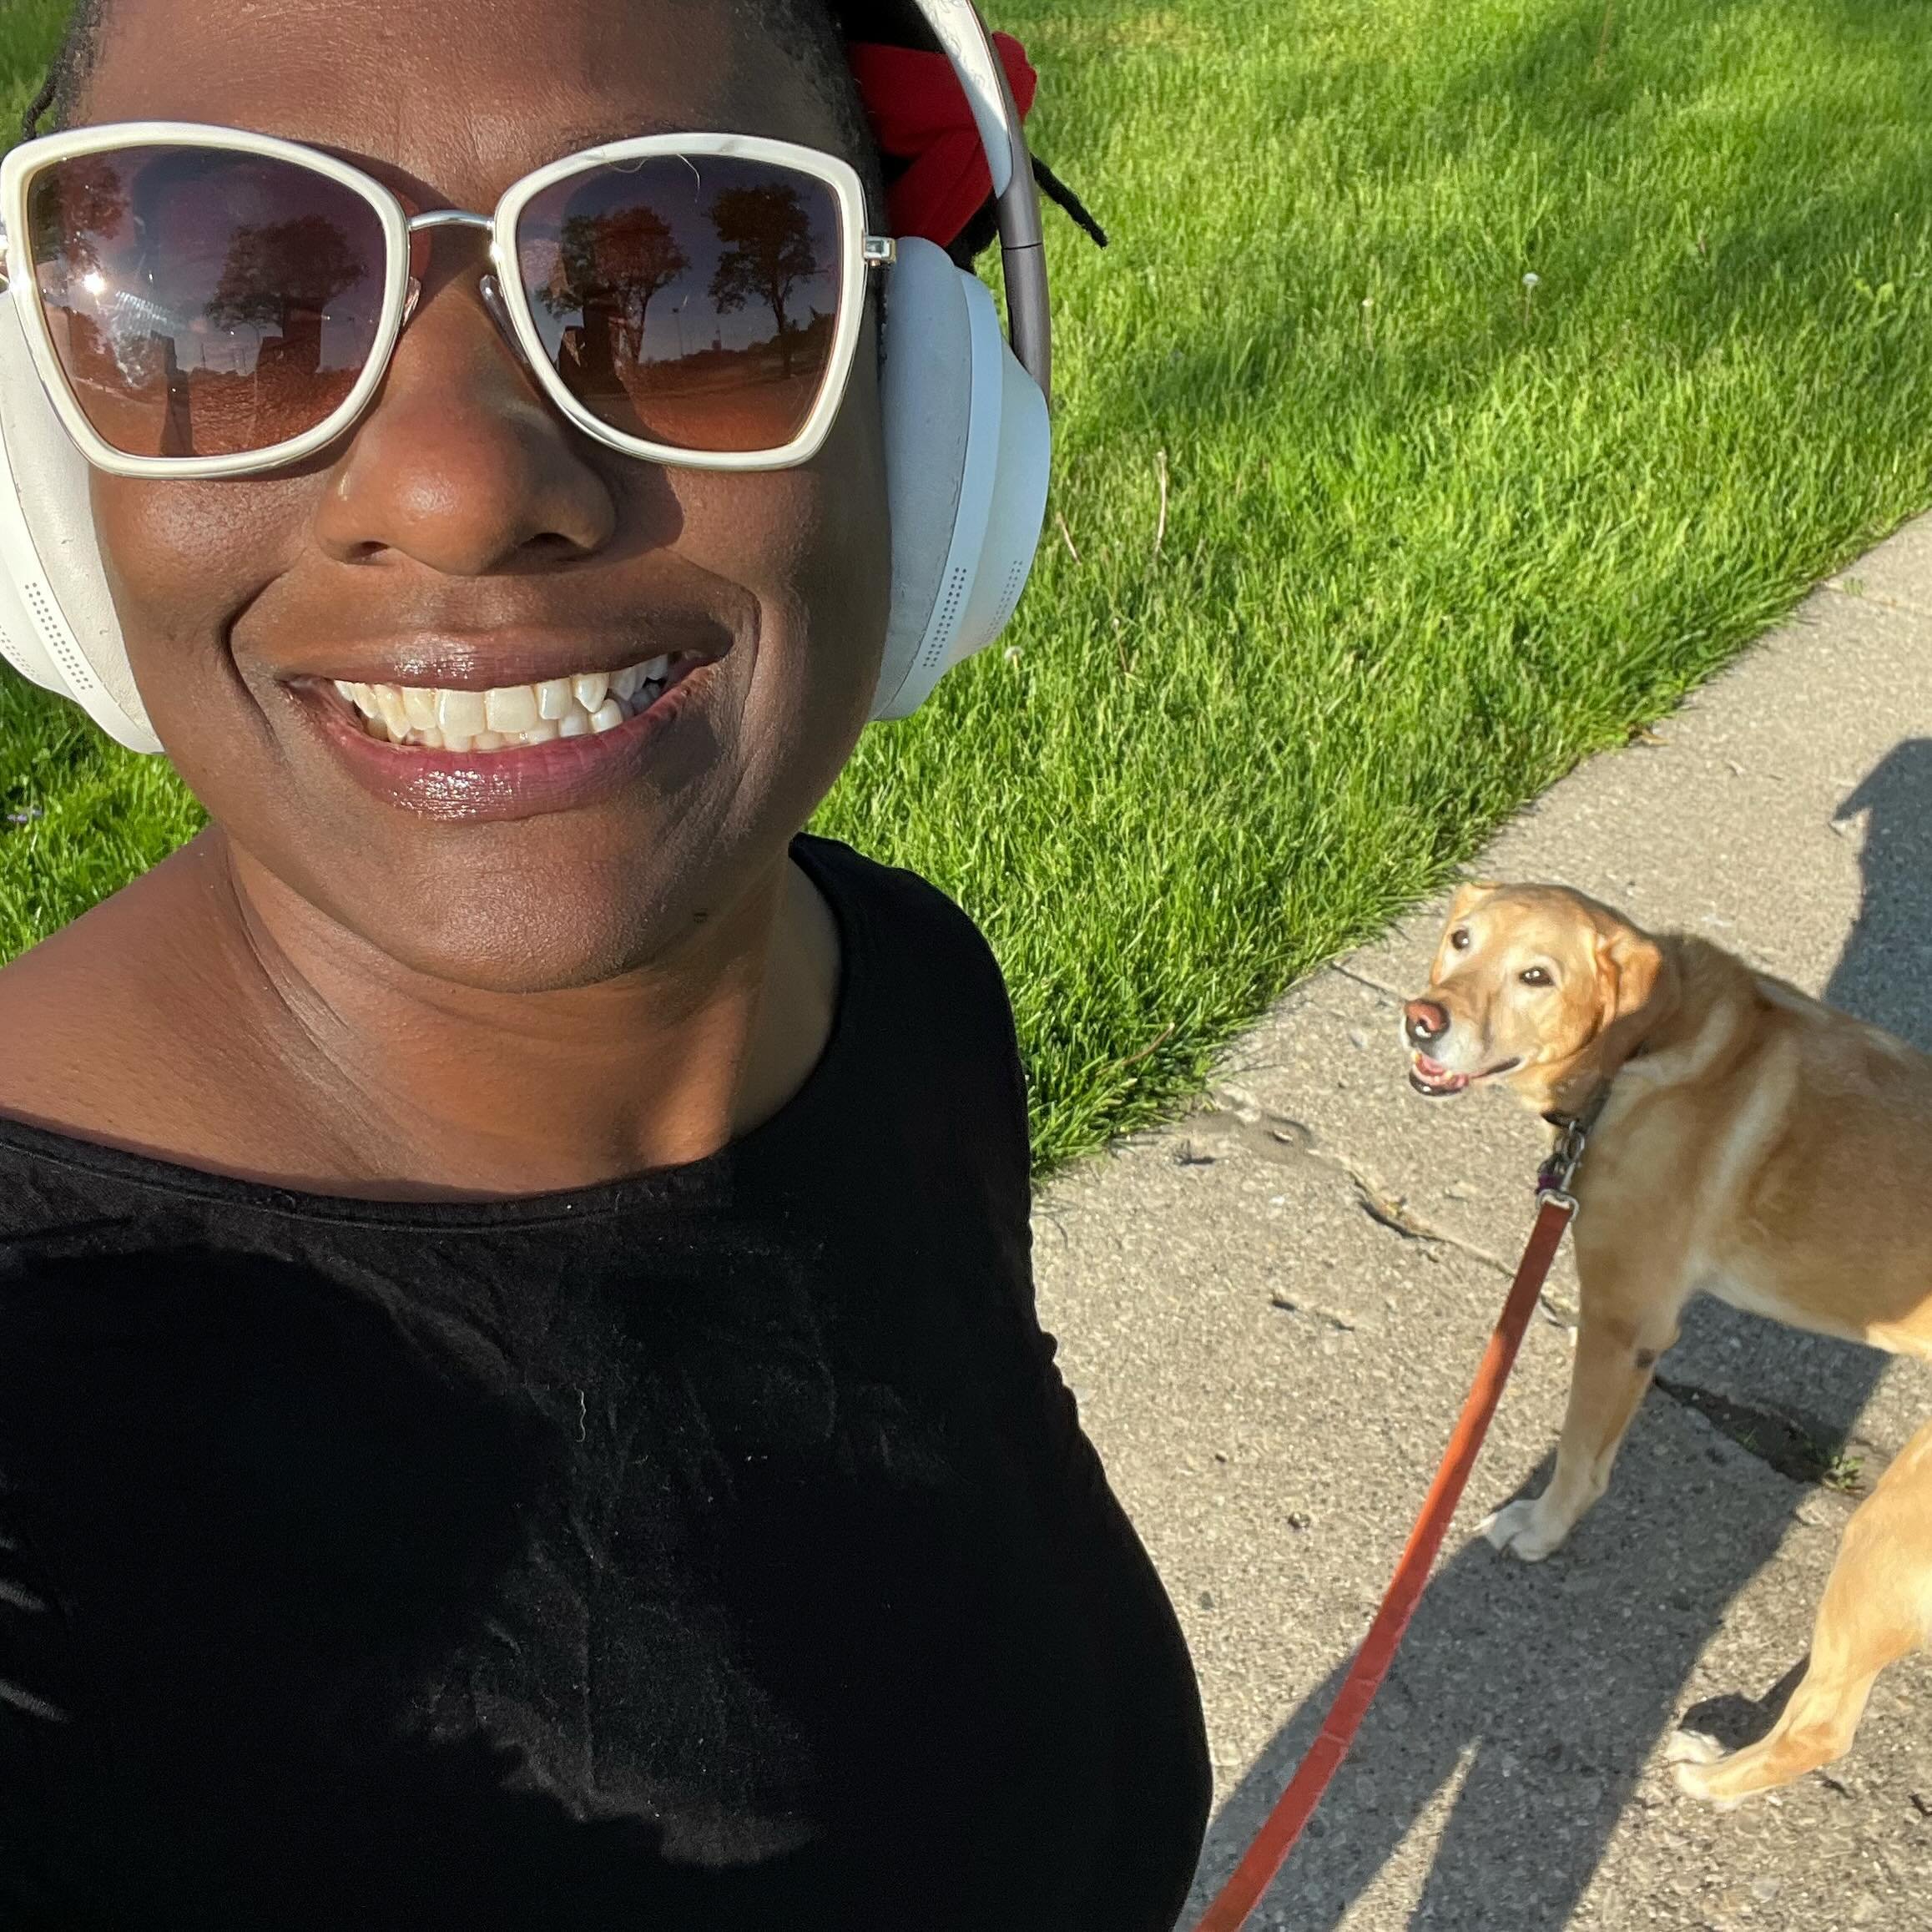 Good morning! Sissy Dog and I are all smiles after watching videos of students doing direct action during graduation ceremonies! This movement auntie is SO proud! 😘